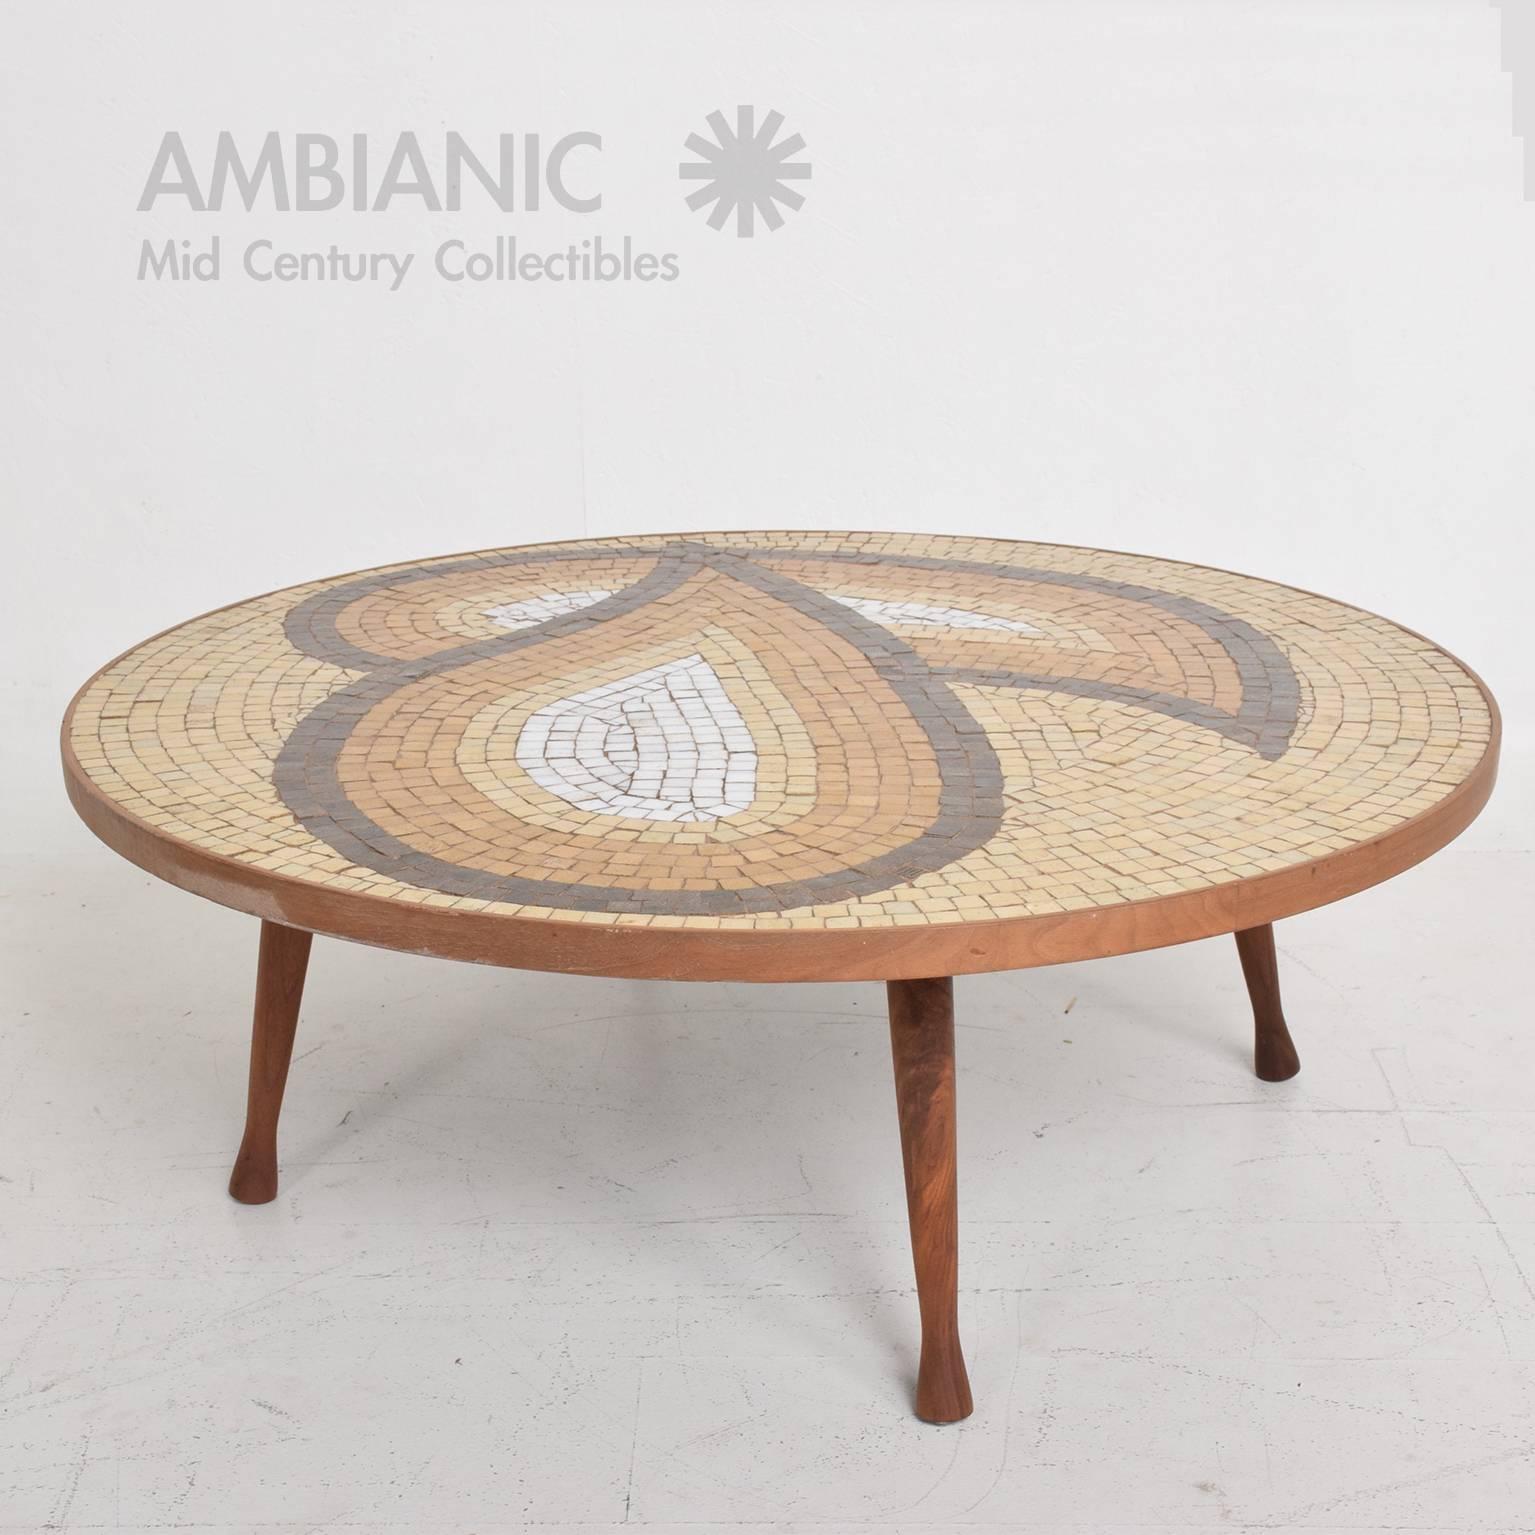 For your consideration a vintage Mid-Century Modern coffee table with round shape. Sculptural tile pattern in tan and brown tones with walnut legs and walnut band.

Legs can be removed for safe and easy shipping.

No stamp present from the